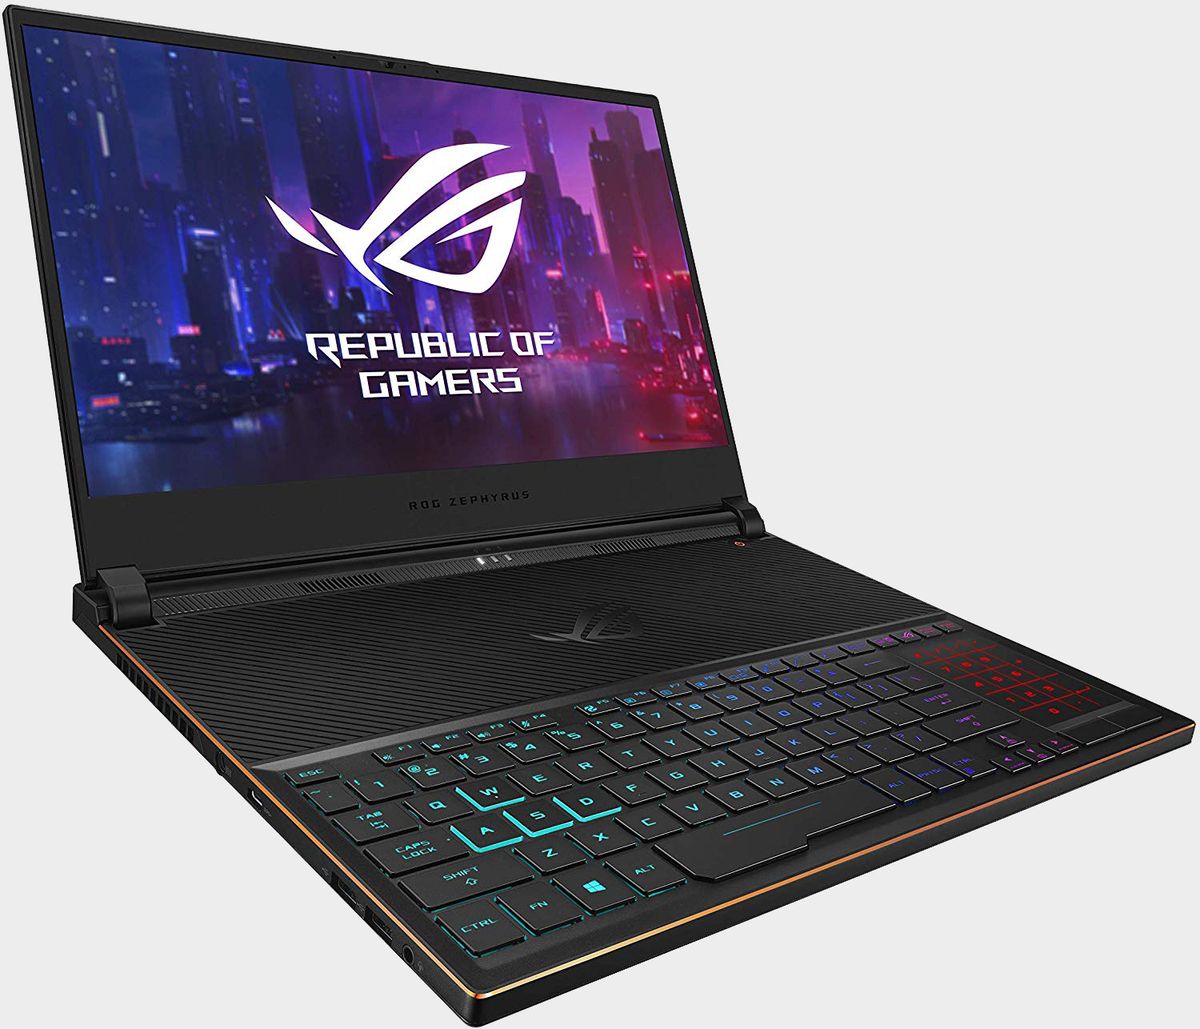 This Gaming Laptop With A Geforce Rtx 2080 Max Q Is 250 Of Geforce Now Price